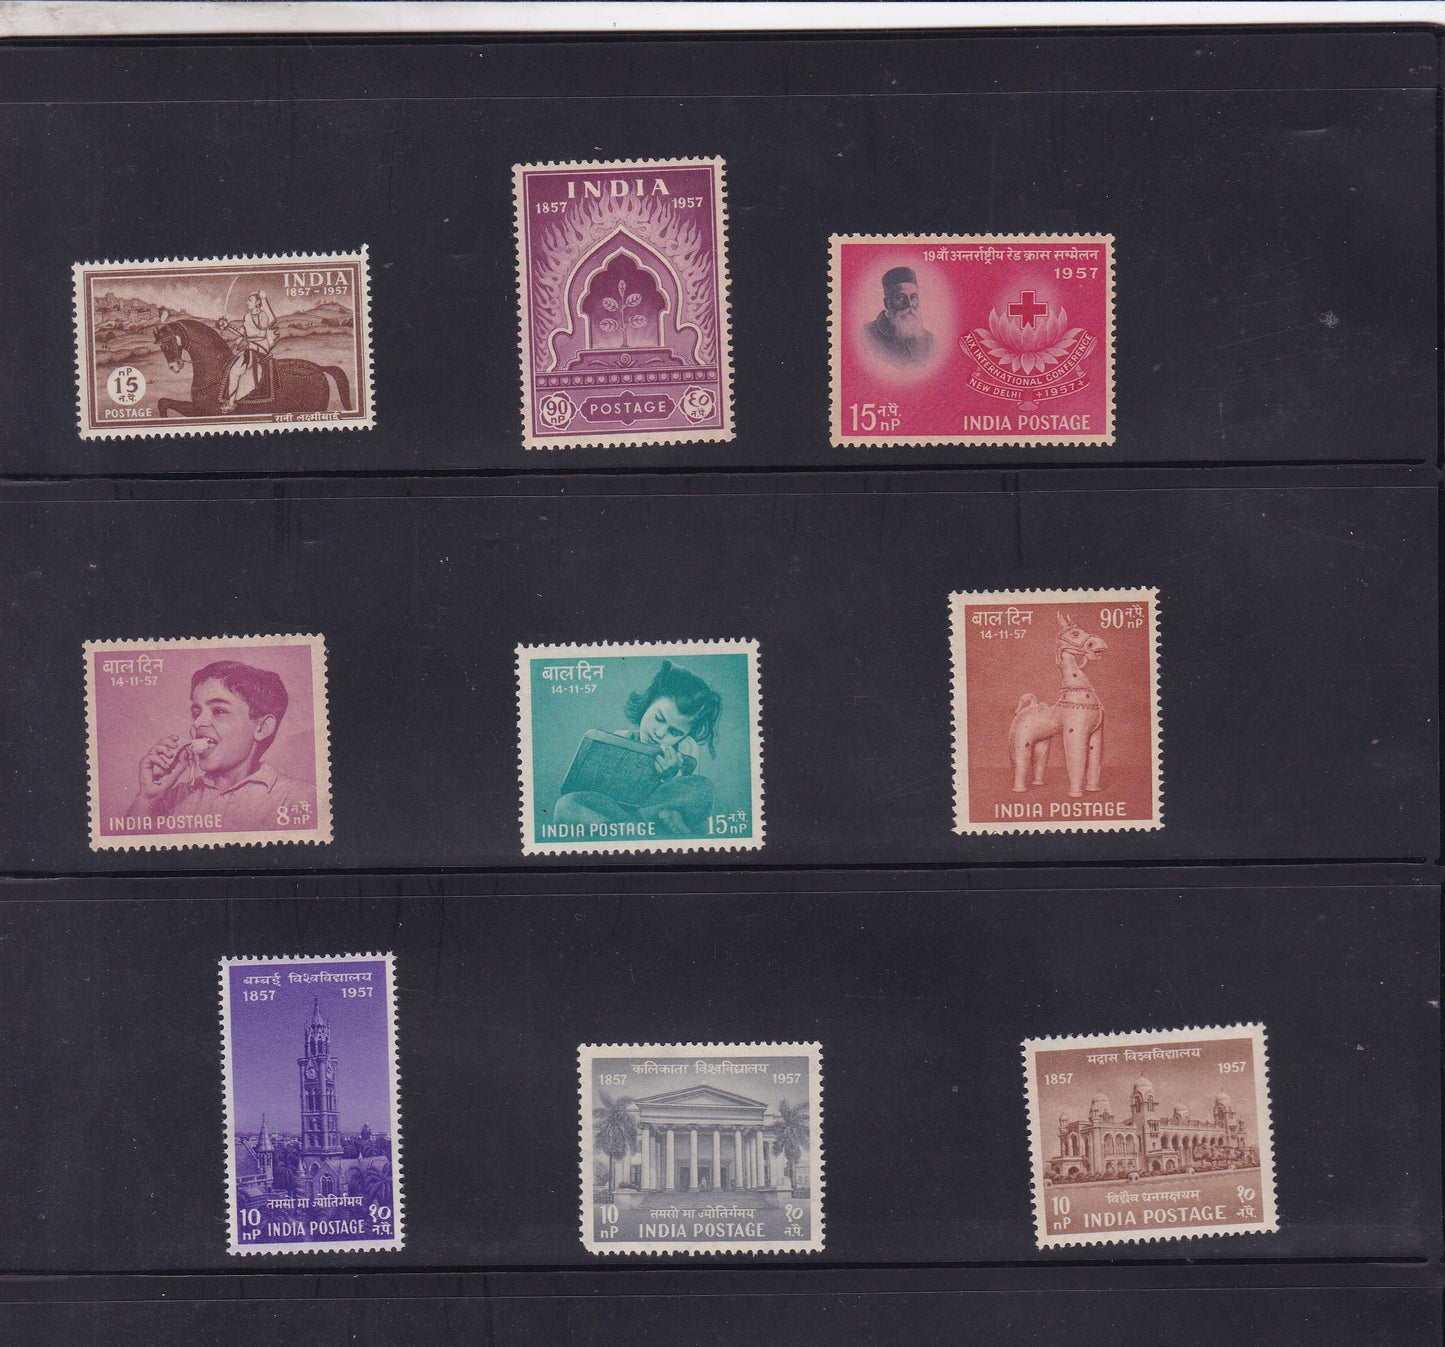 India-1957 Full Year pack MNH Stamps